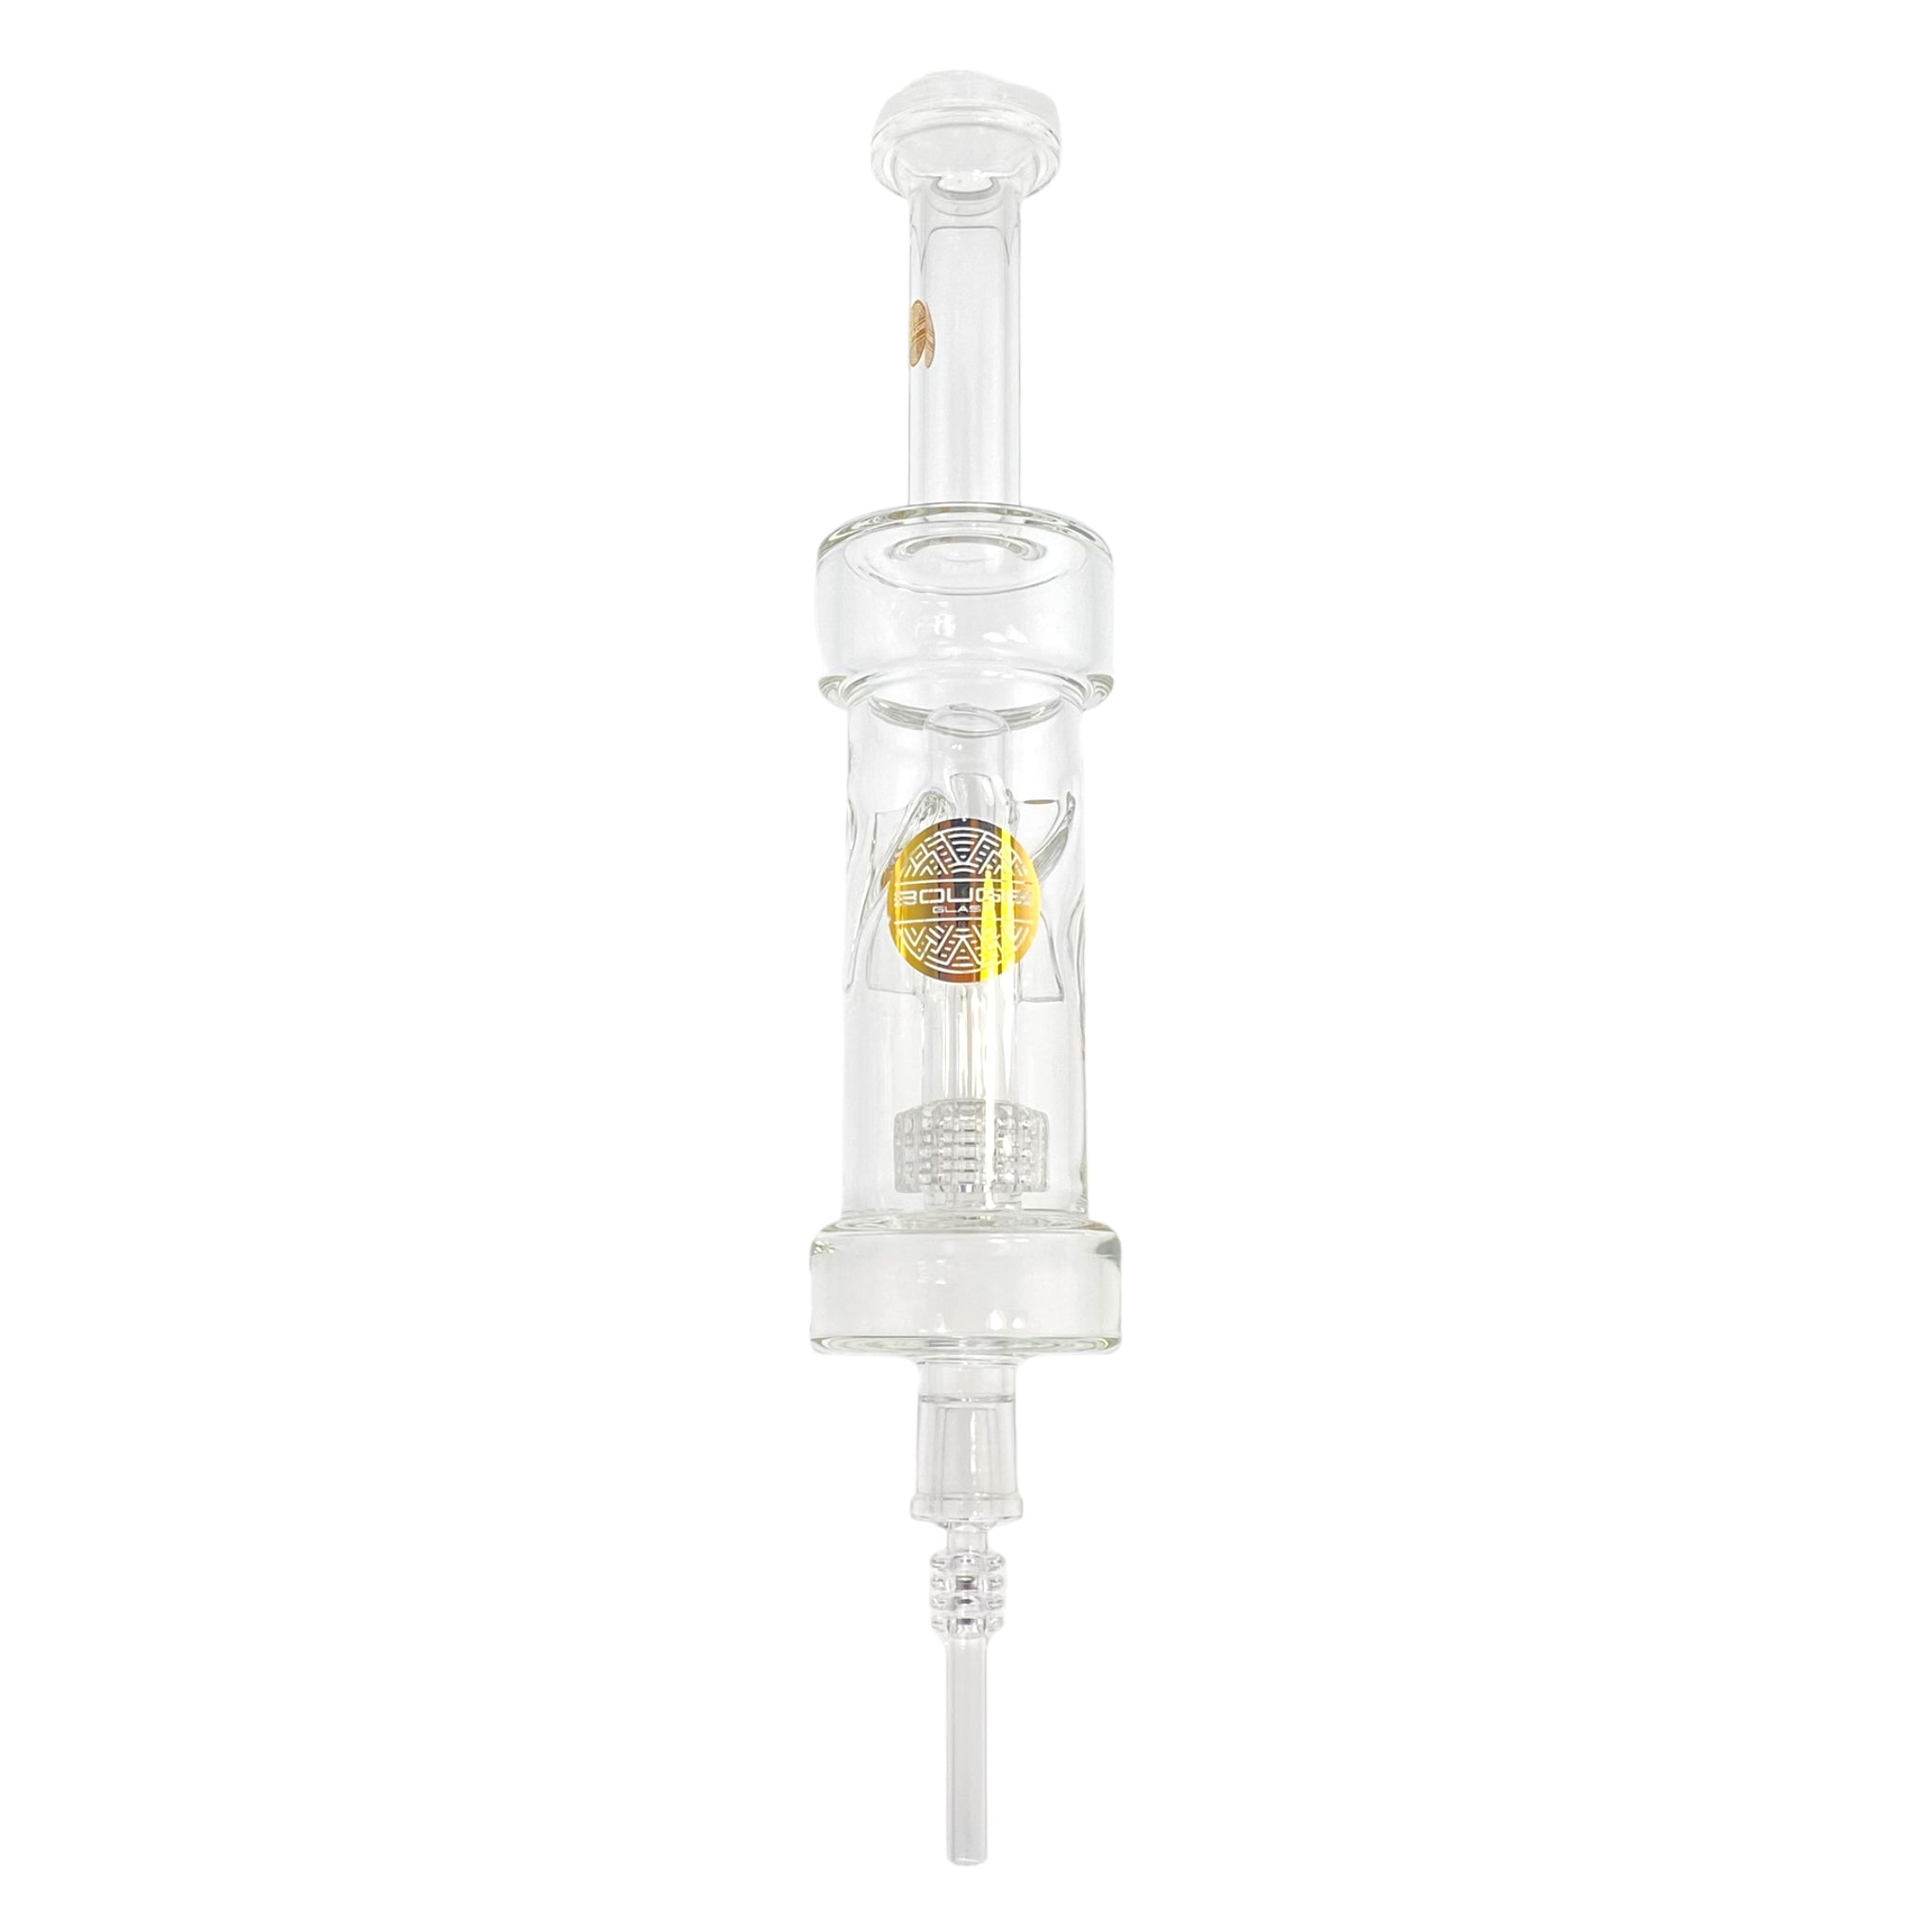 Character Glass Nectar Collector Kit - 14mm - Nothing's Impossible